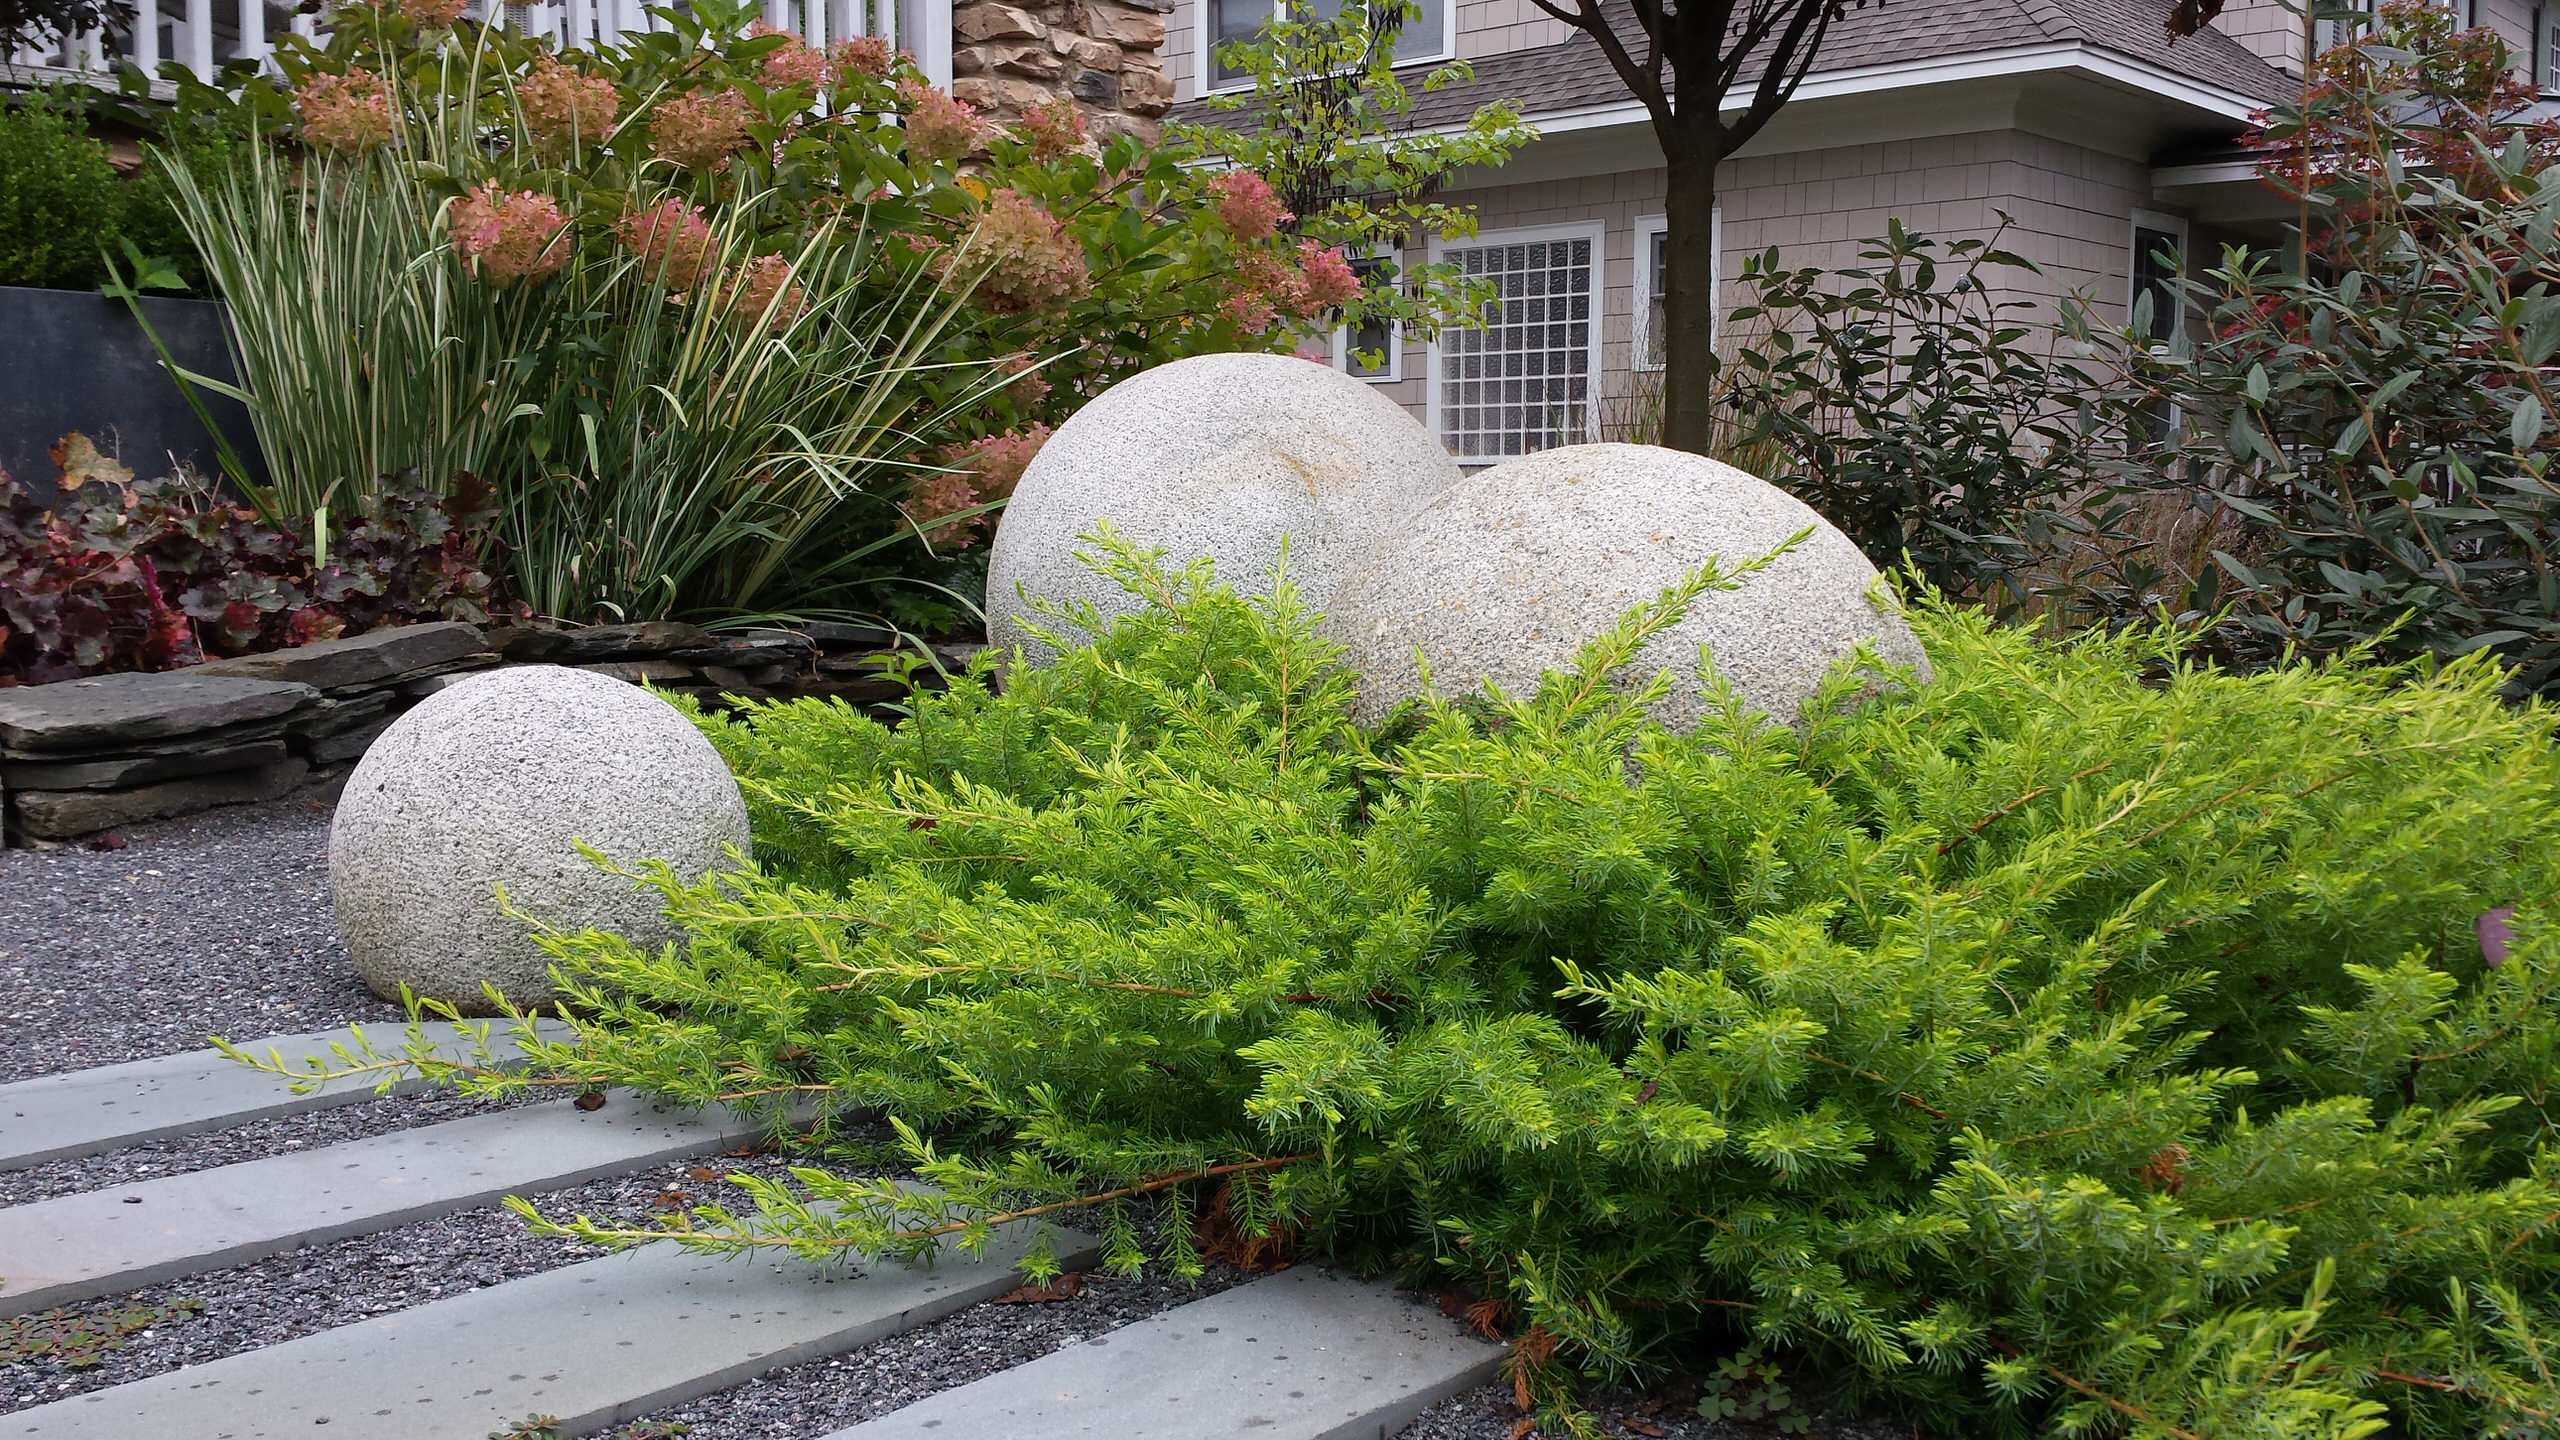 'All Gold' shore junipers with granite spheres.